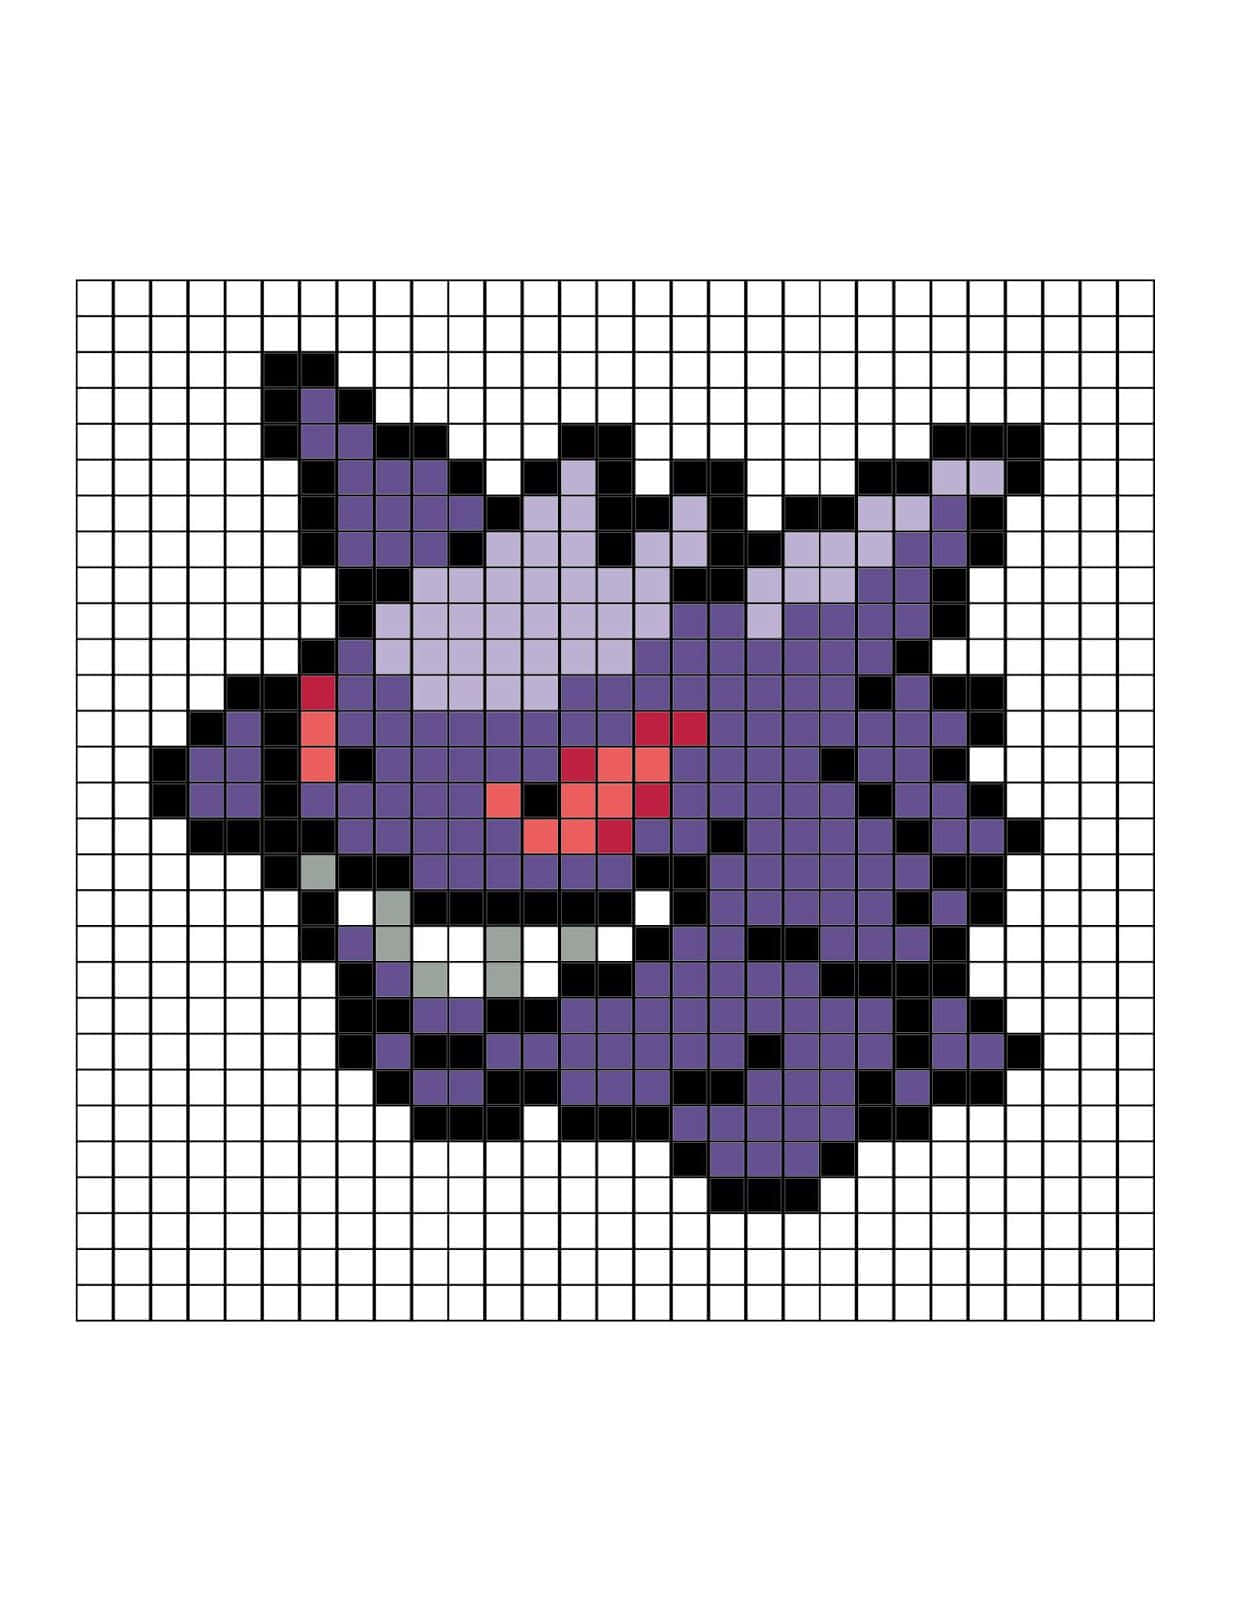 Mysterious Gengar Lurking in the Shadows